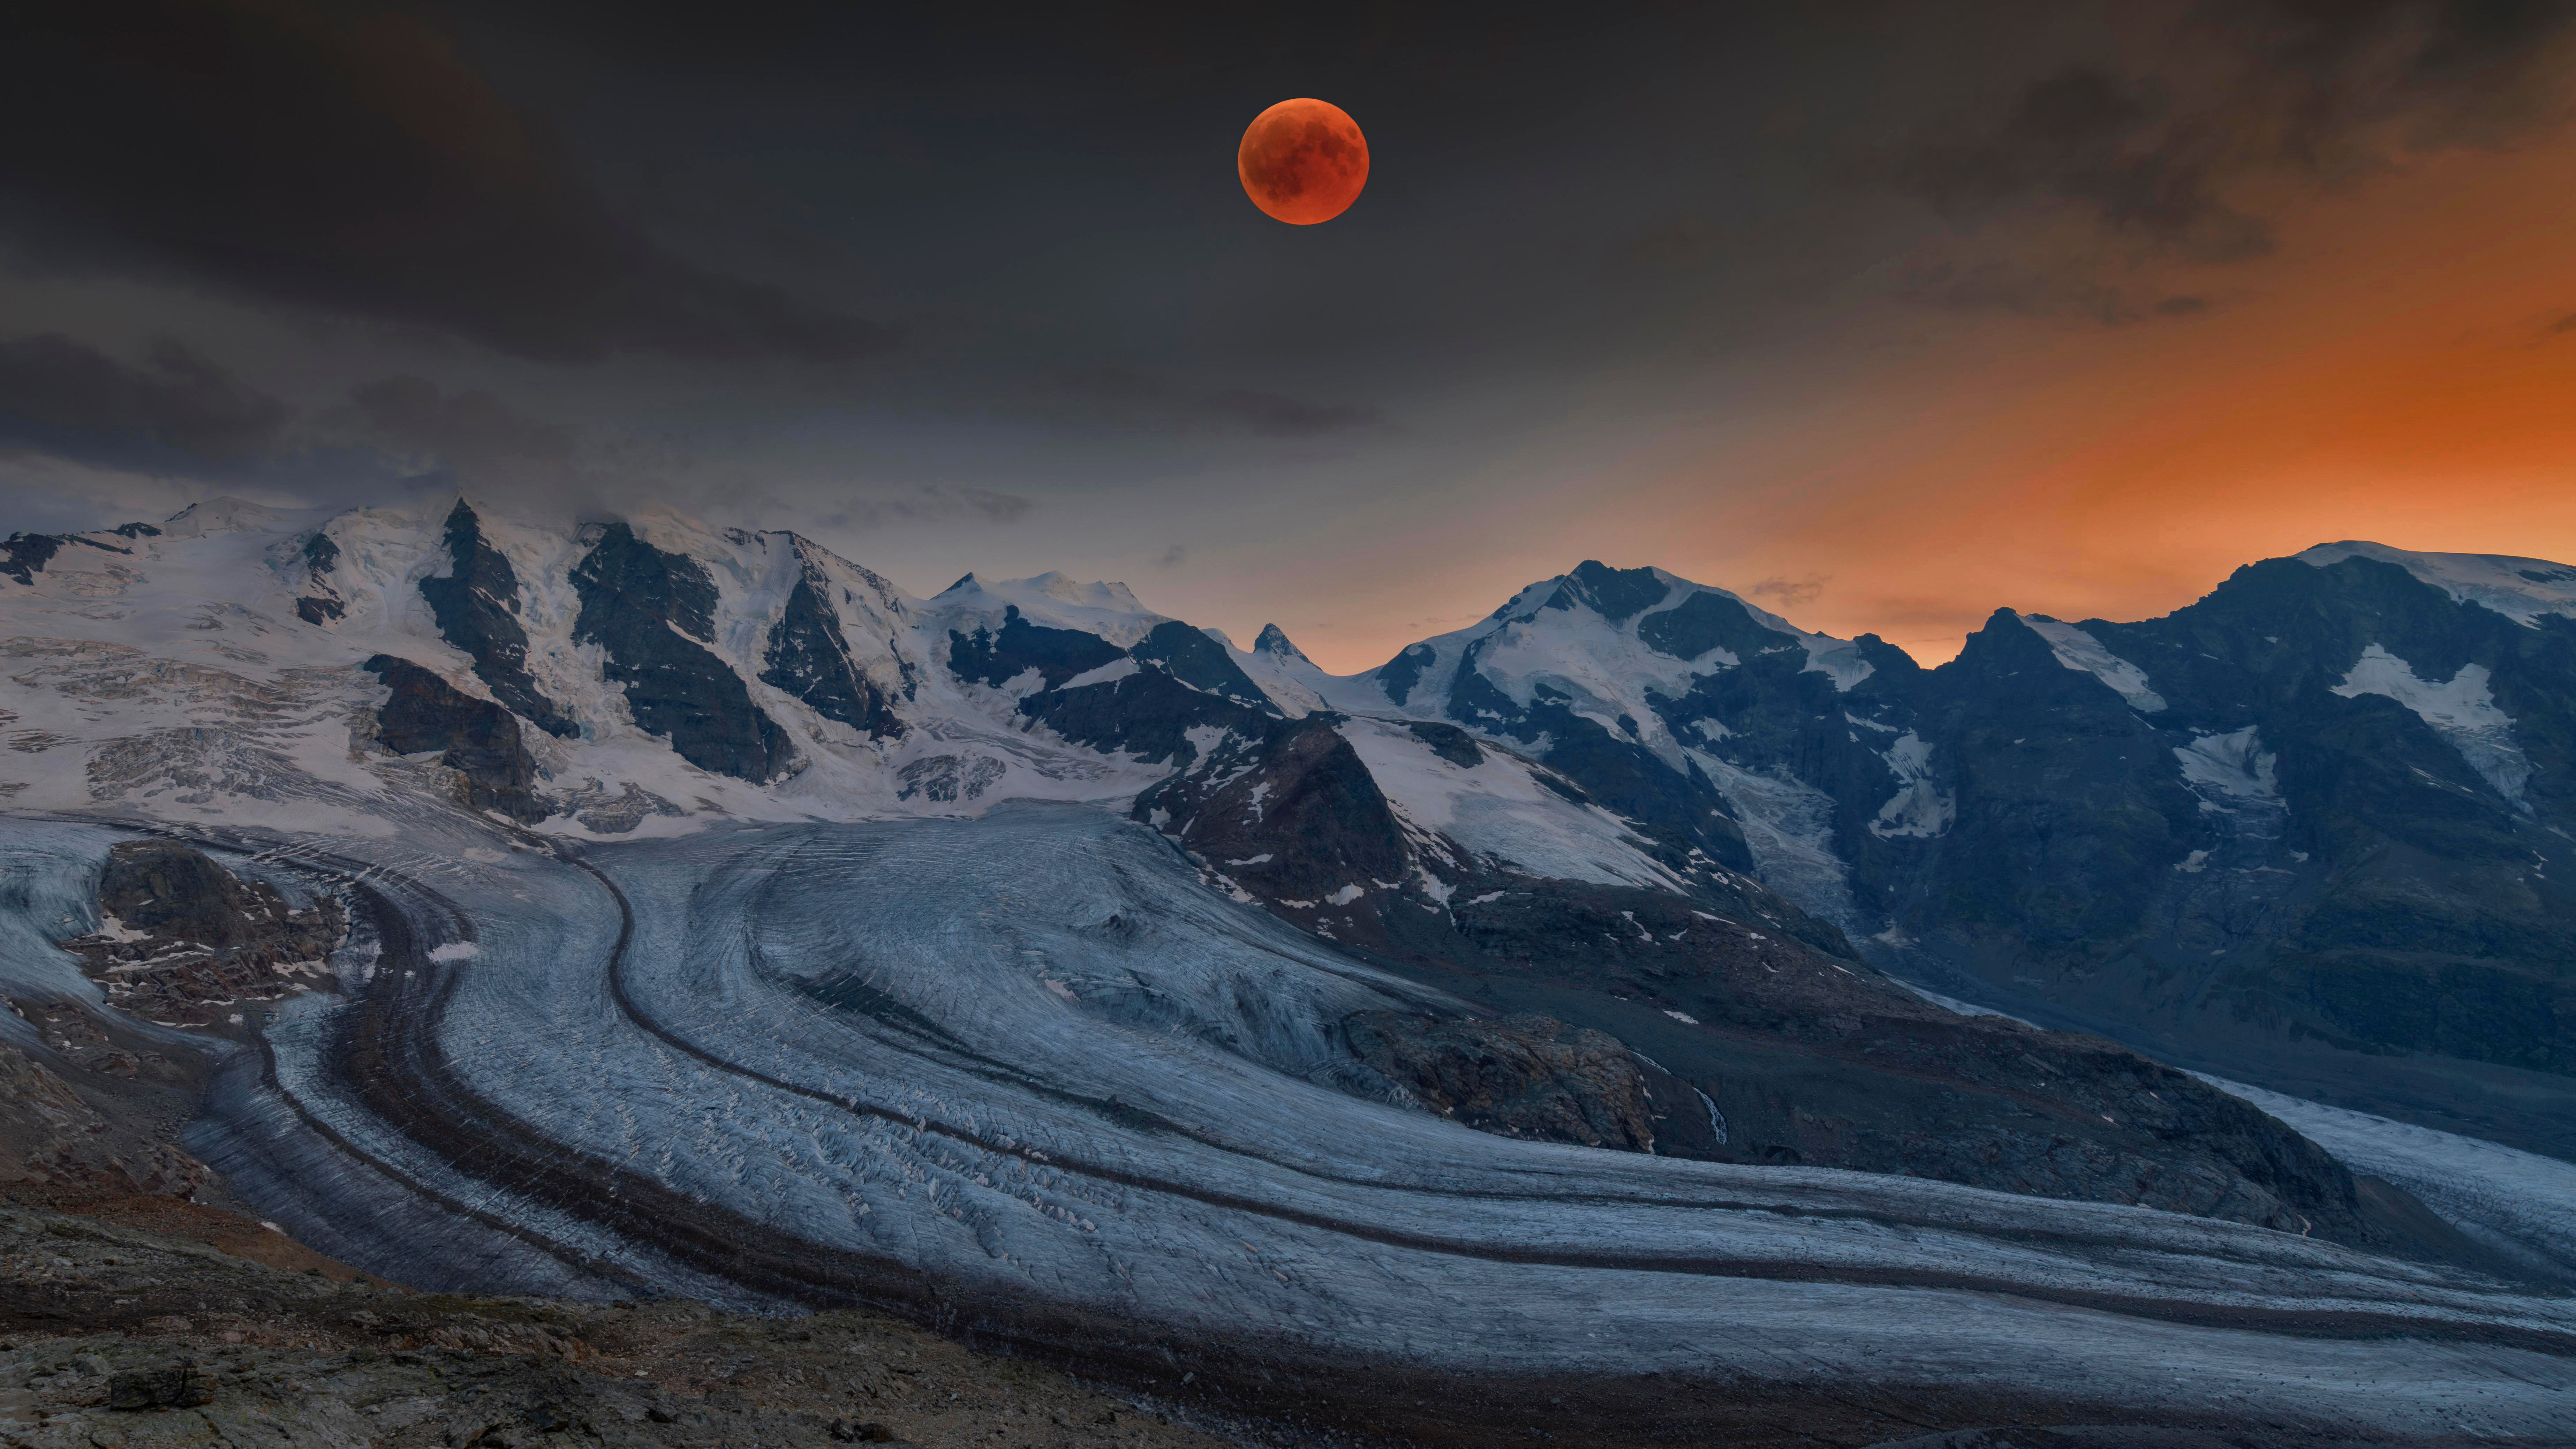 Panoramic view of the Bernina Range with blood moon, Eastern Alps, Engadin, Switzerland by Bernd Zoller